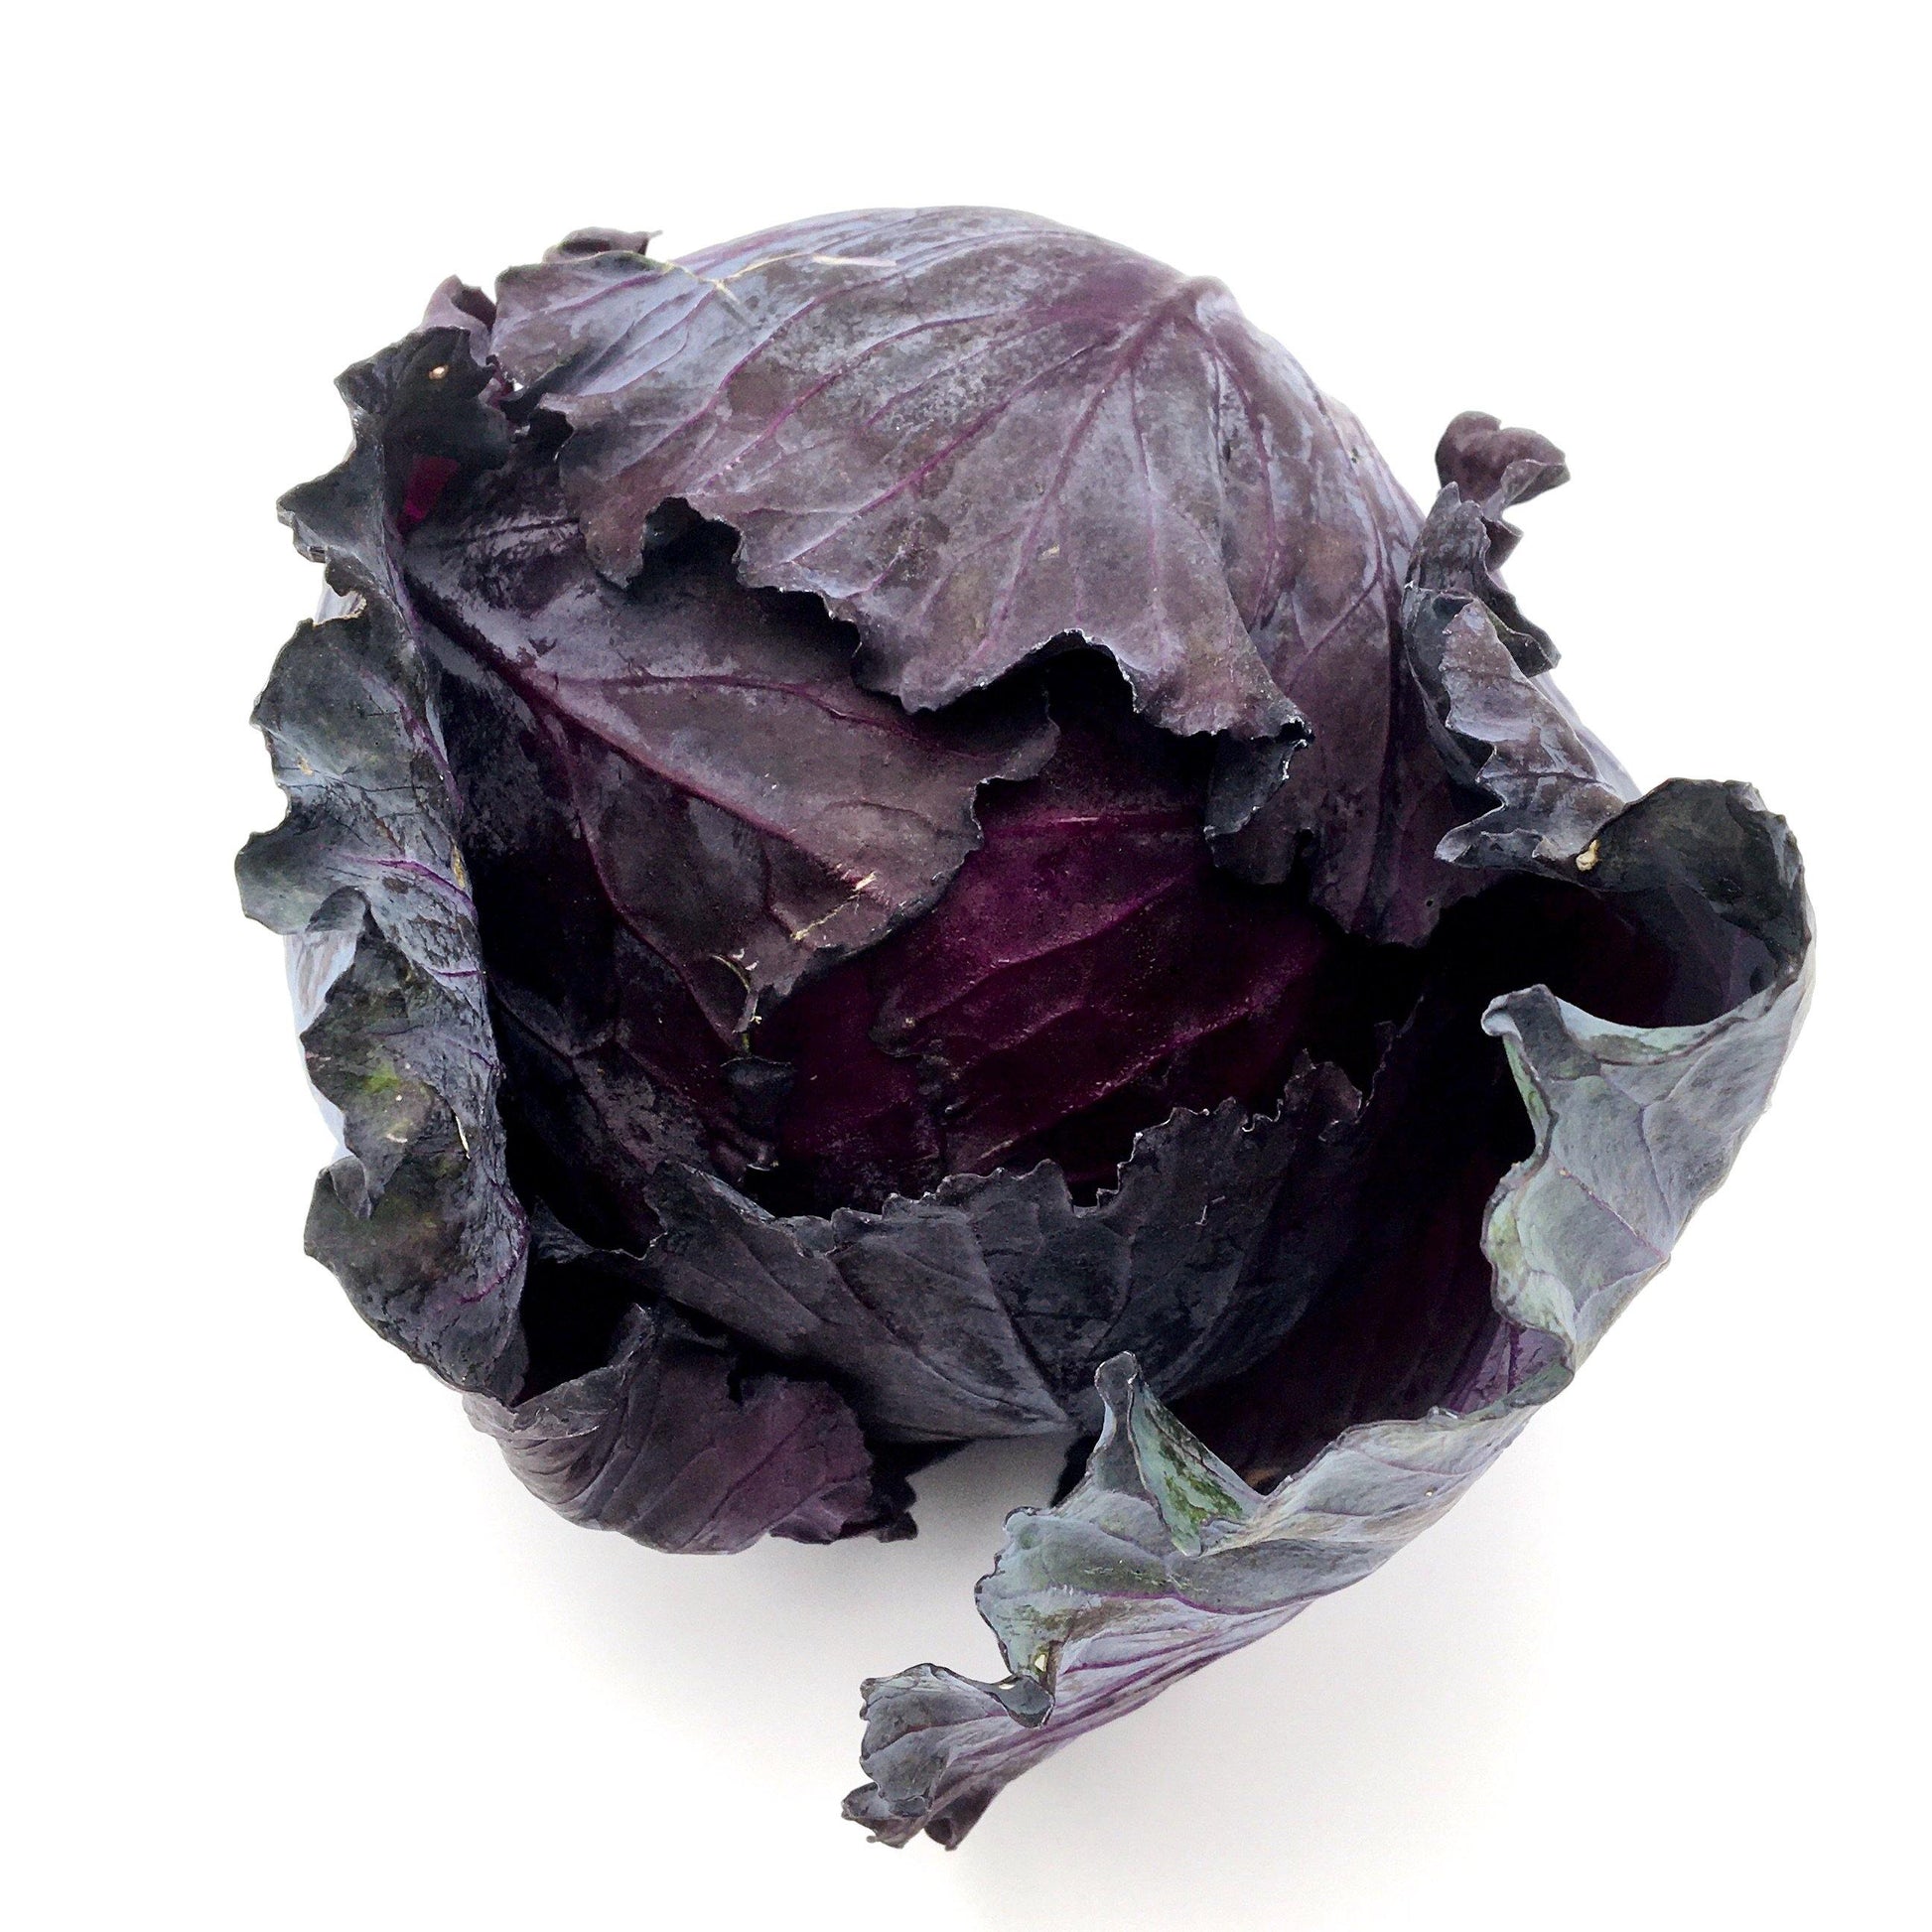 Red Cabbage (Aprx 700g) - Wildsprout